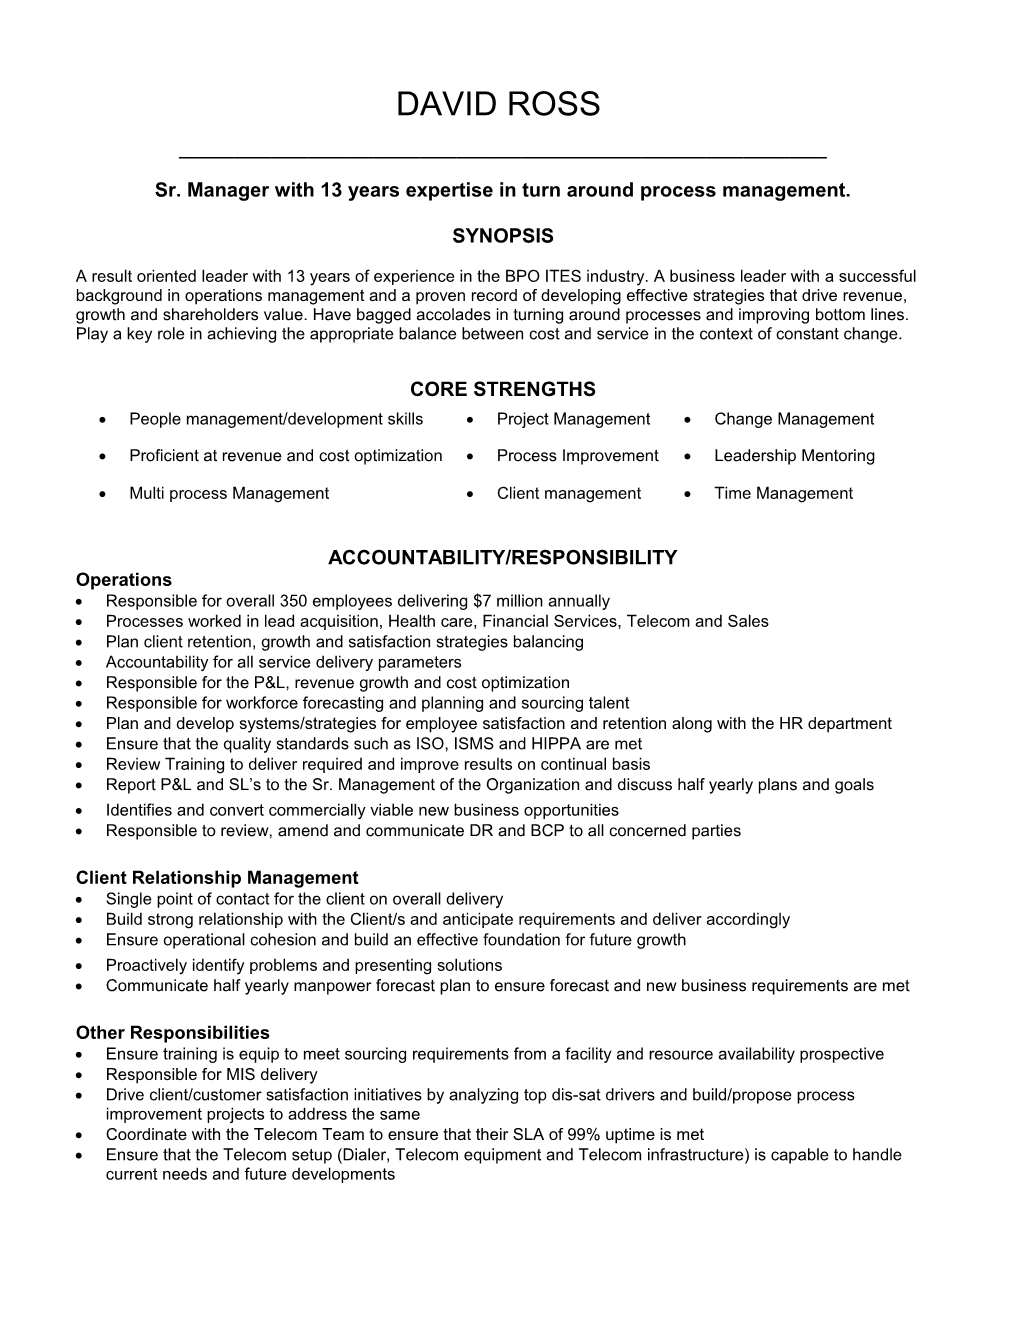 Sr. Manager with 13 Years Expertise in Turn Around Process Management